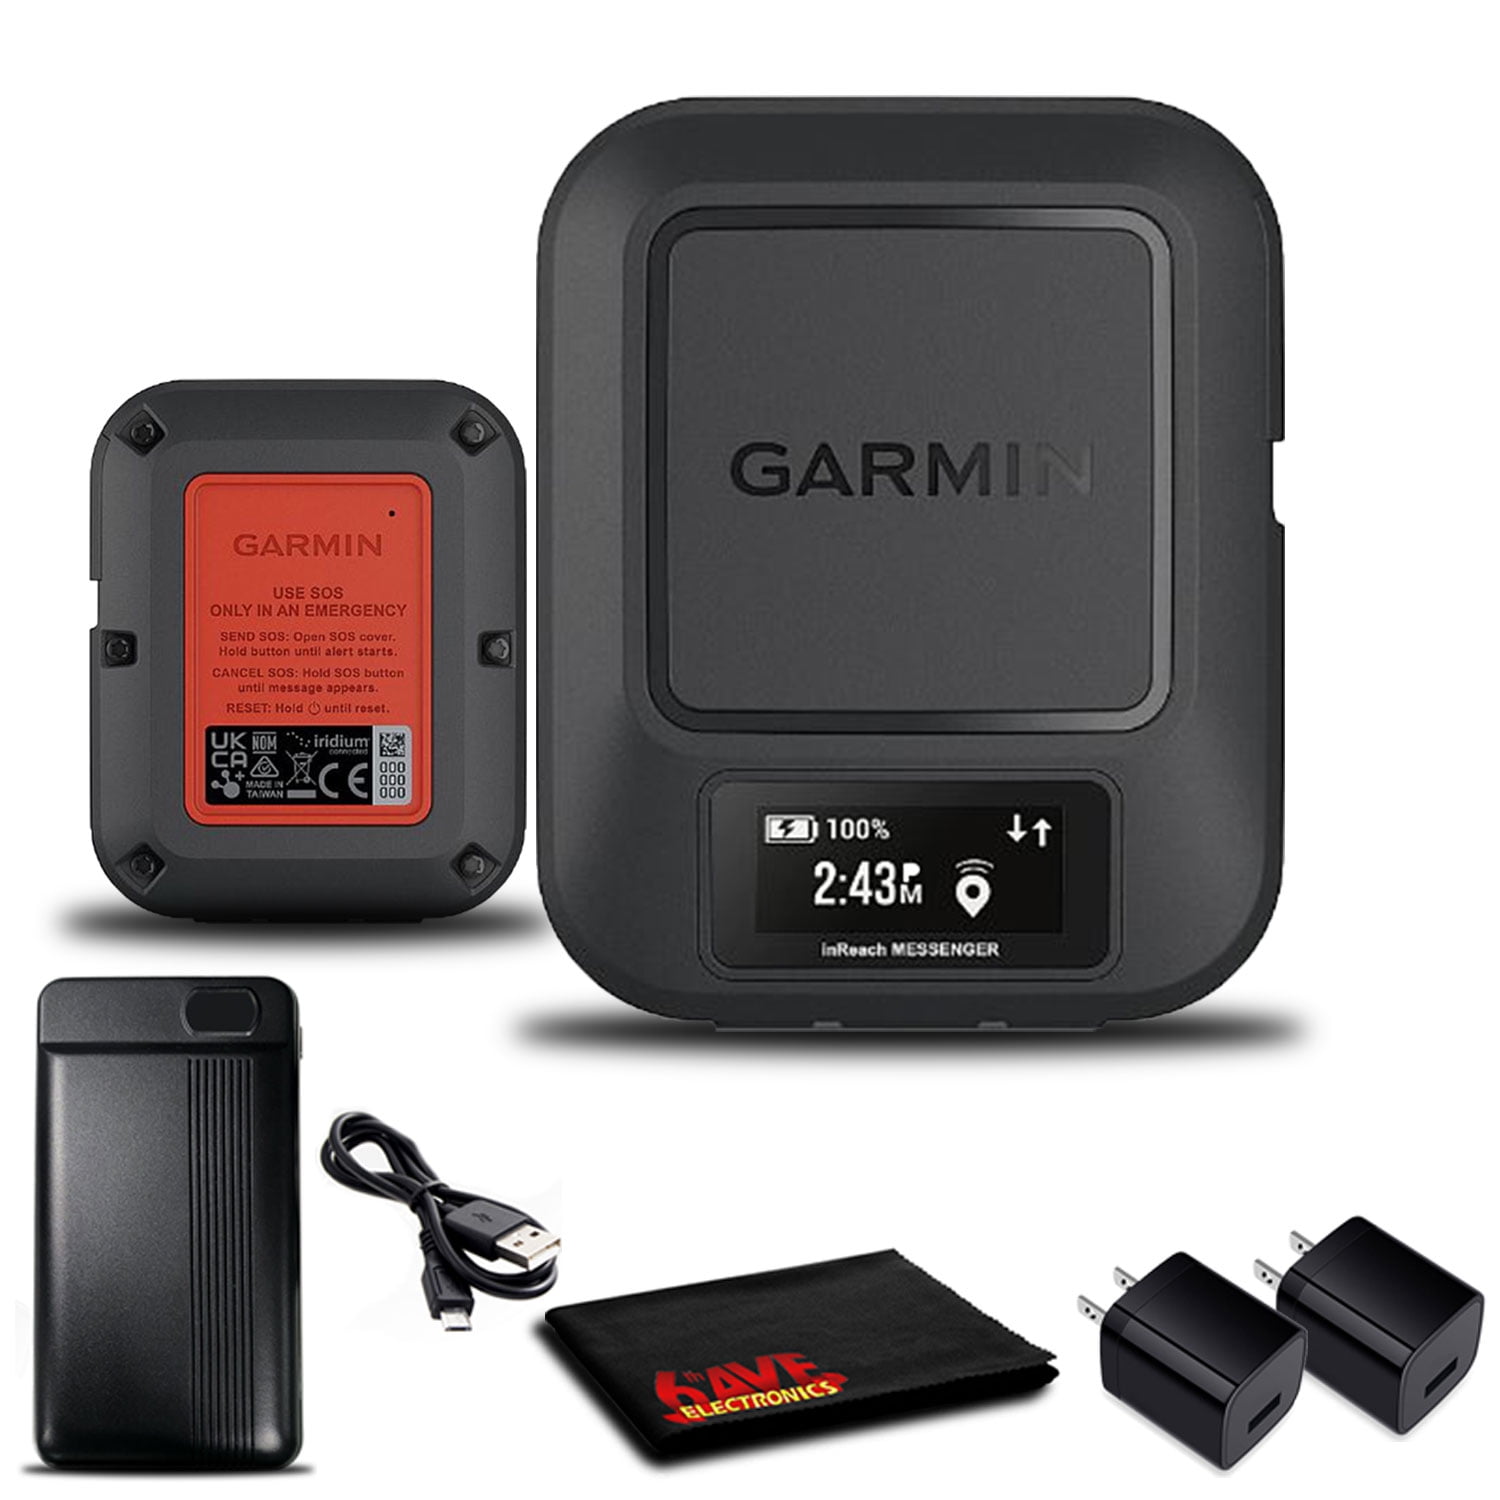 Garmin inReach Messenger with Battery Charger and Two USB Wall Adapters - Walmart.com